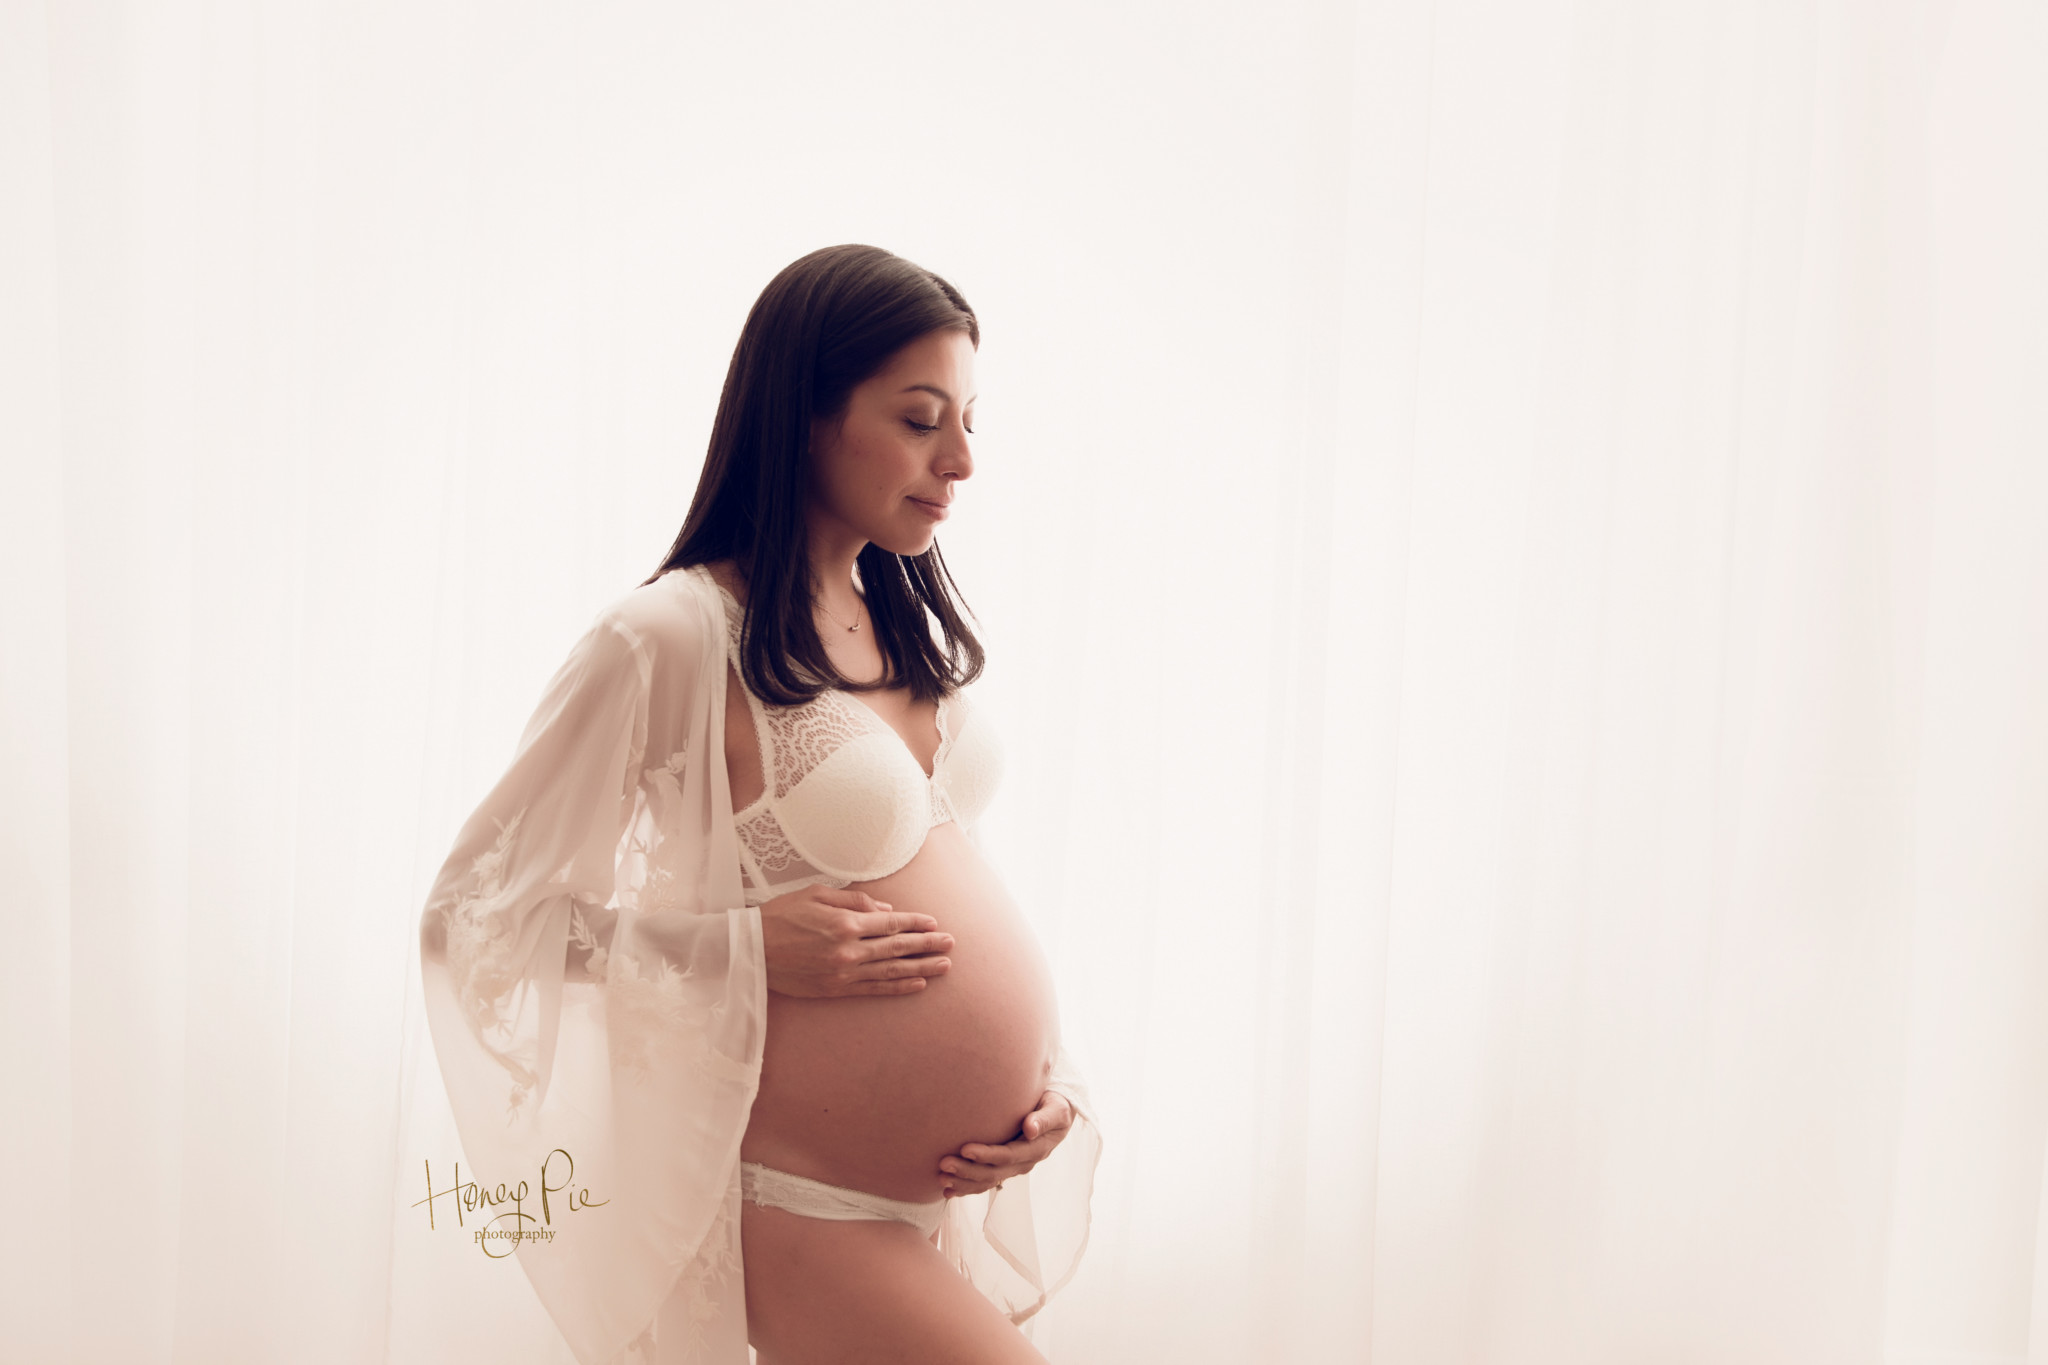 Pregnant woman holding her beautiful baby bump smiling softly with eyes closed